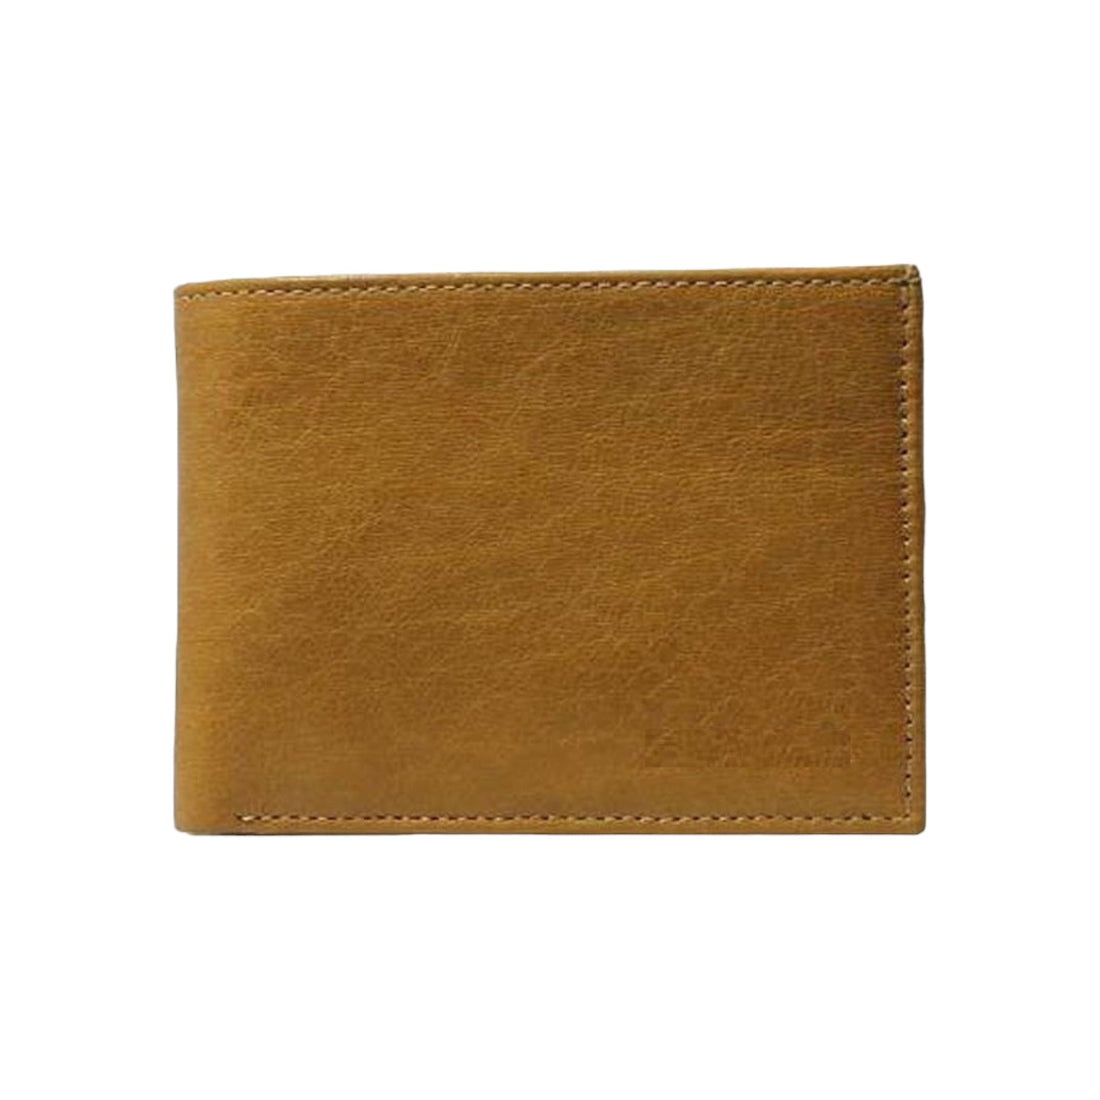 Men leather Wallet with coin pocket